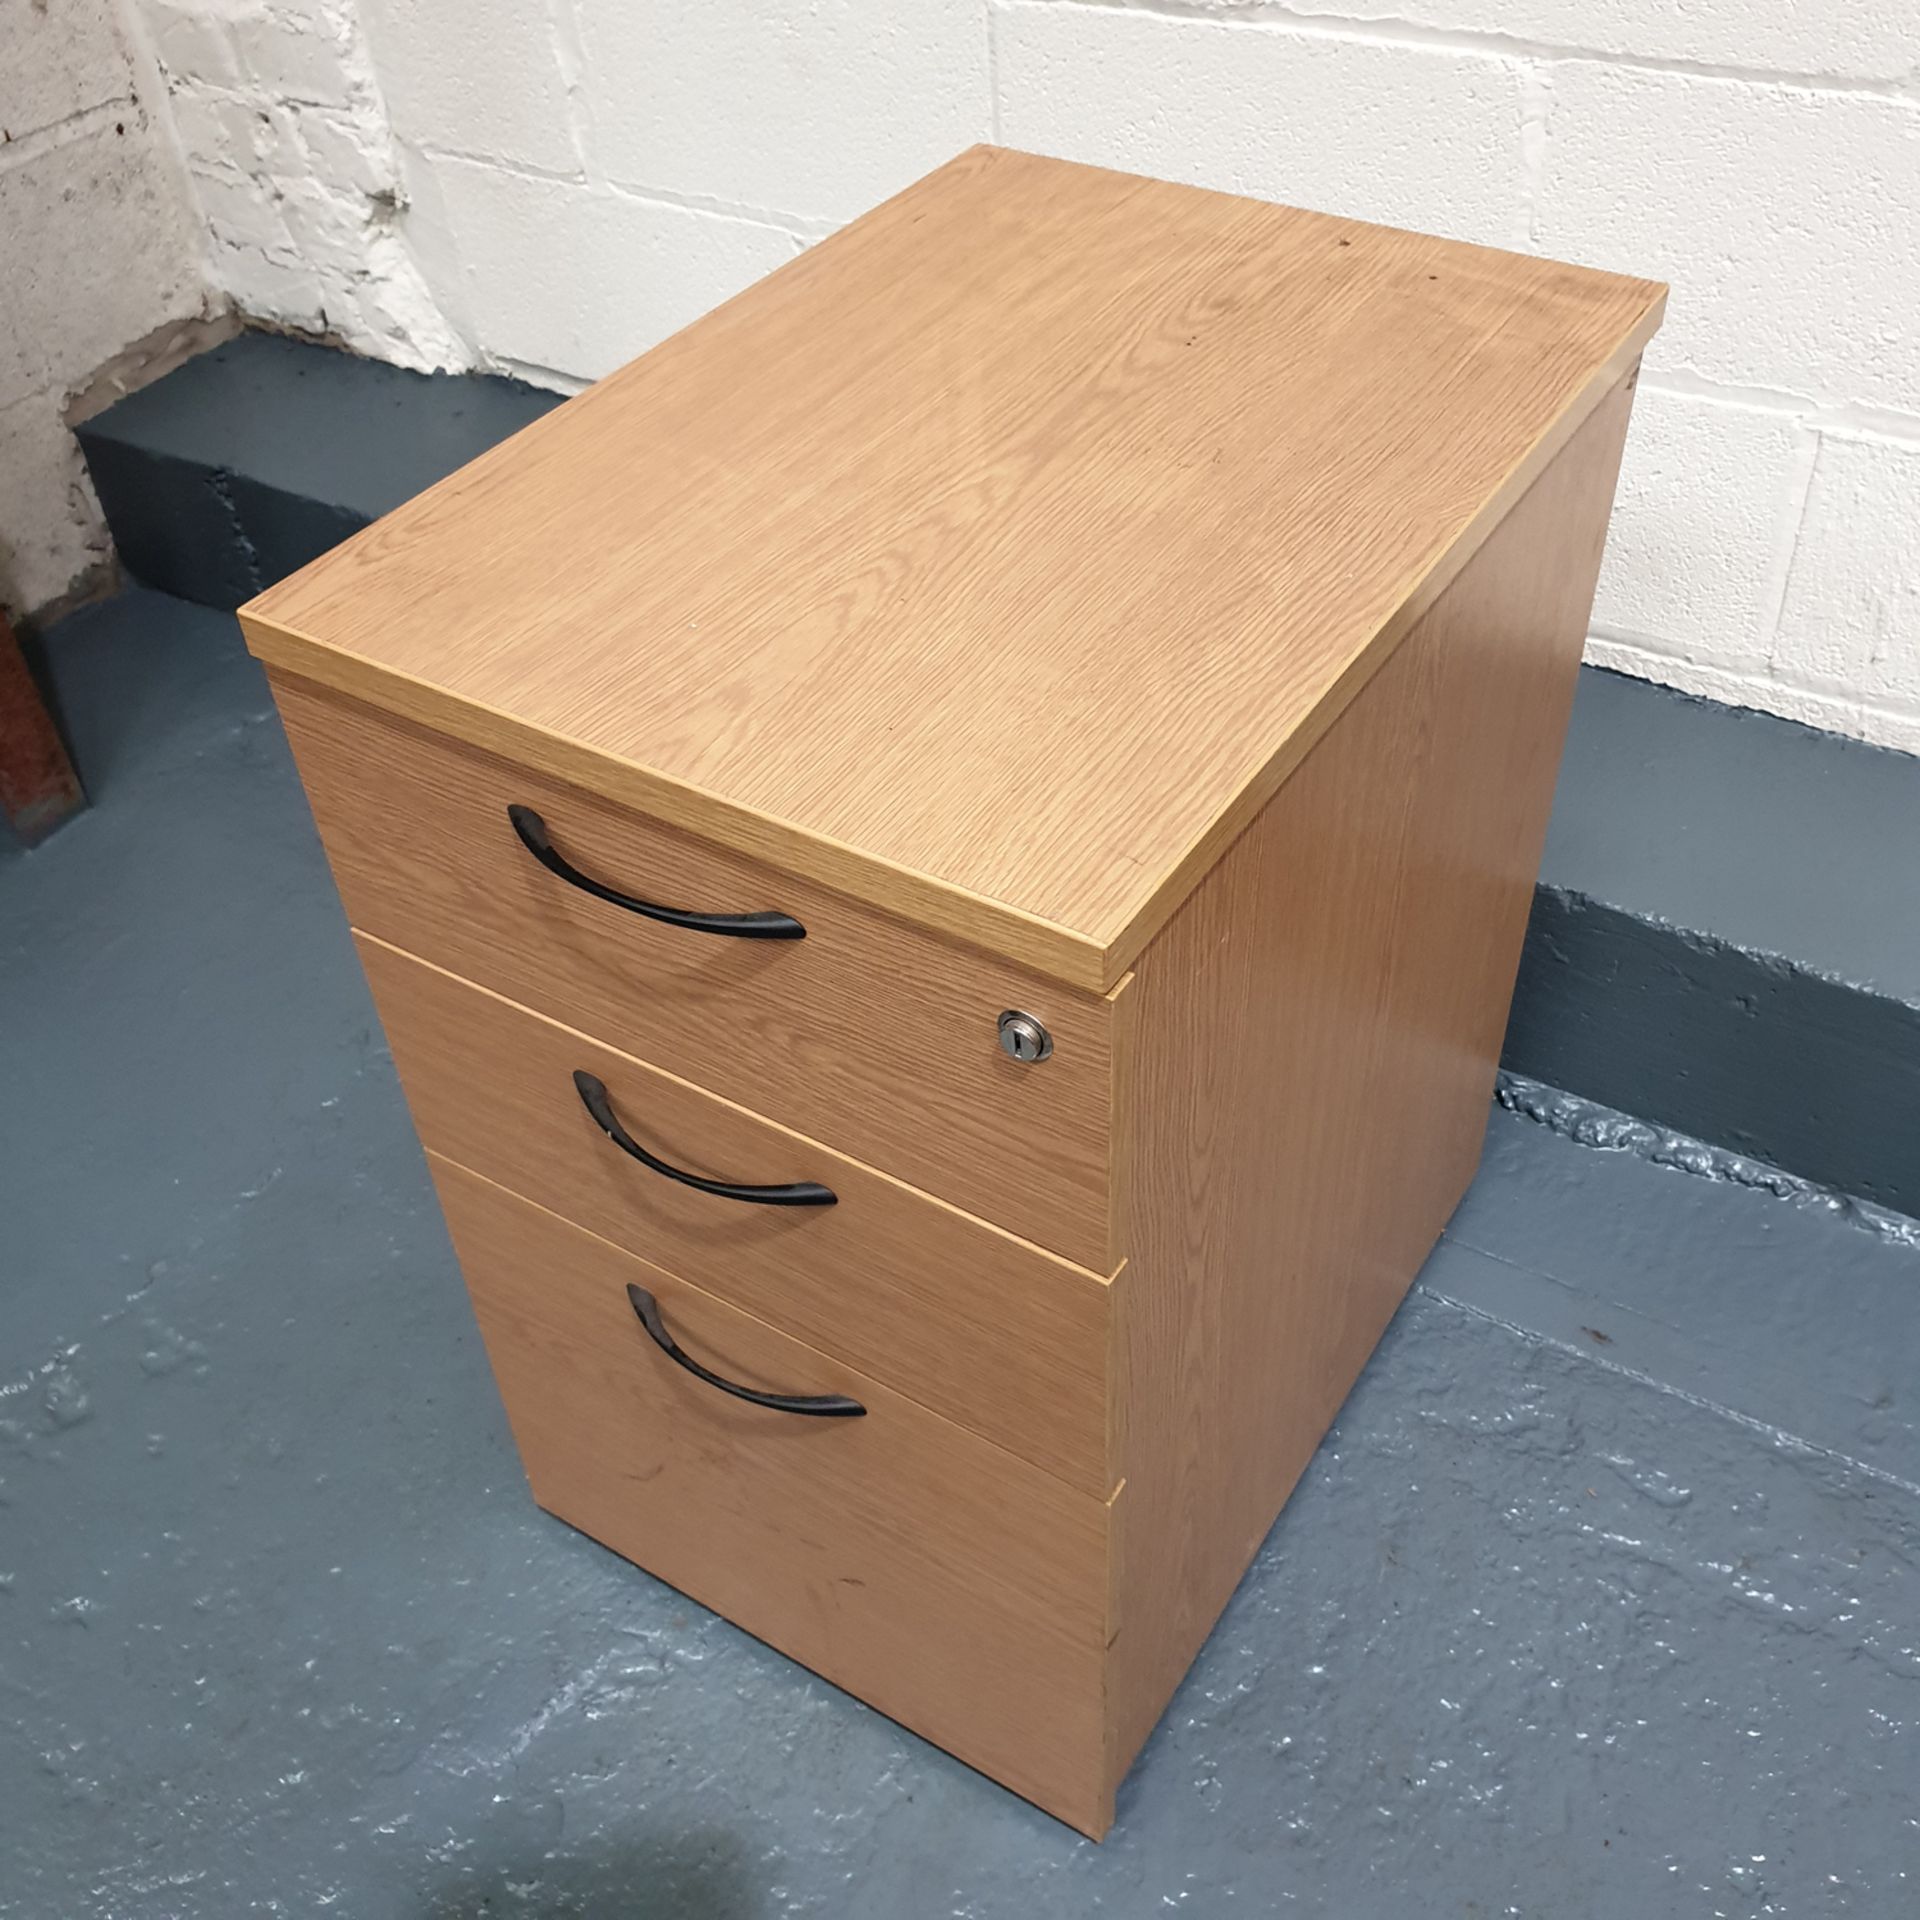 Chest of Drawers. No Key. Approx Dimensions 430mm x 600mm x 720mm High. - Bild 2 aus 4